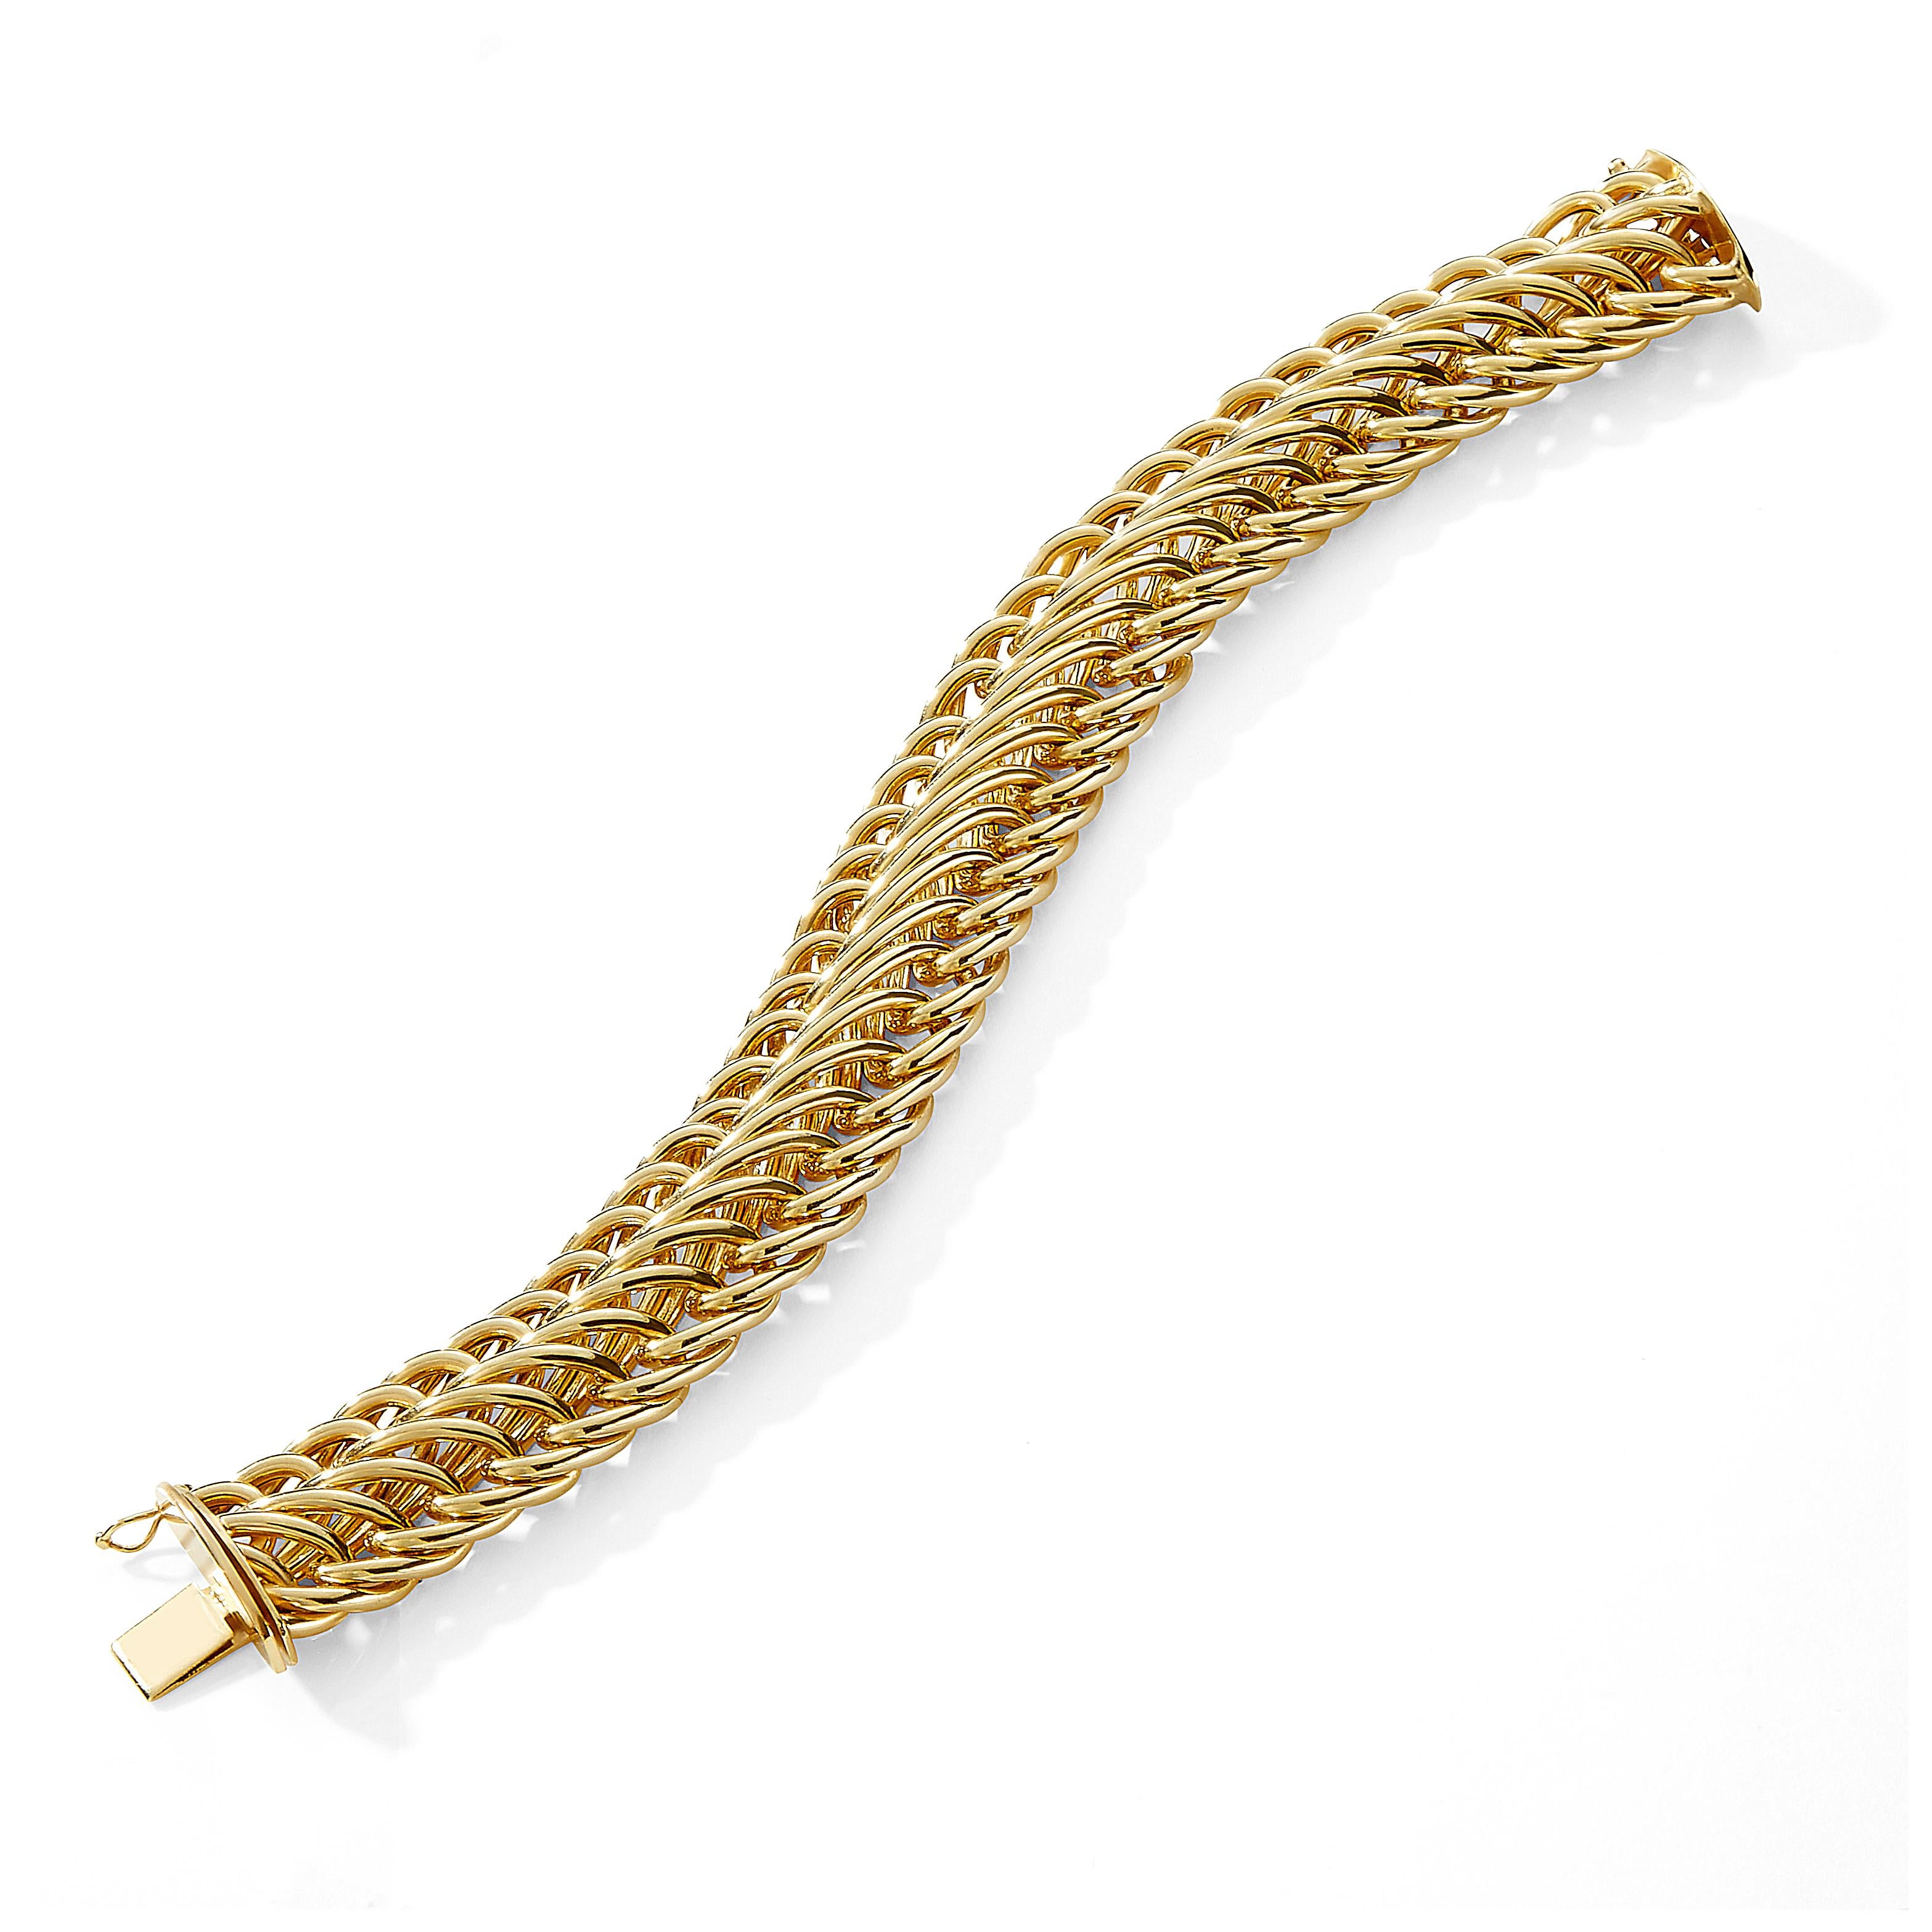 Created in 18 karat yellow gold
7 inch length with box clasp
Safety closure 

Crafted in luxurious 18 karat yellow gold, this 8-inch-long bracelet can be clasped at any desired length, while other size options are also available.

About the